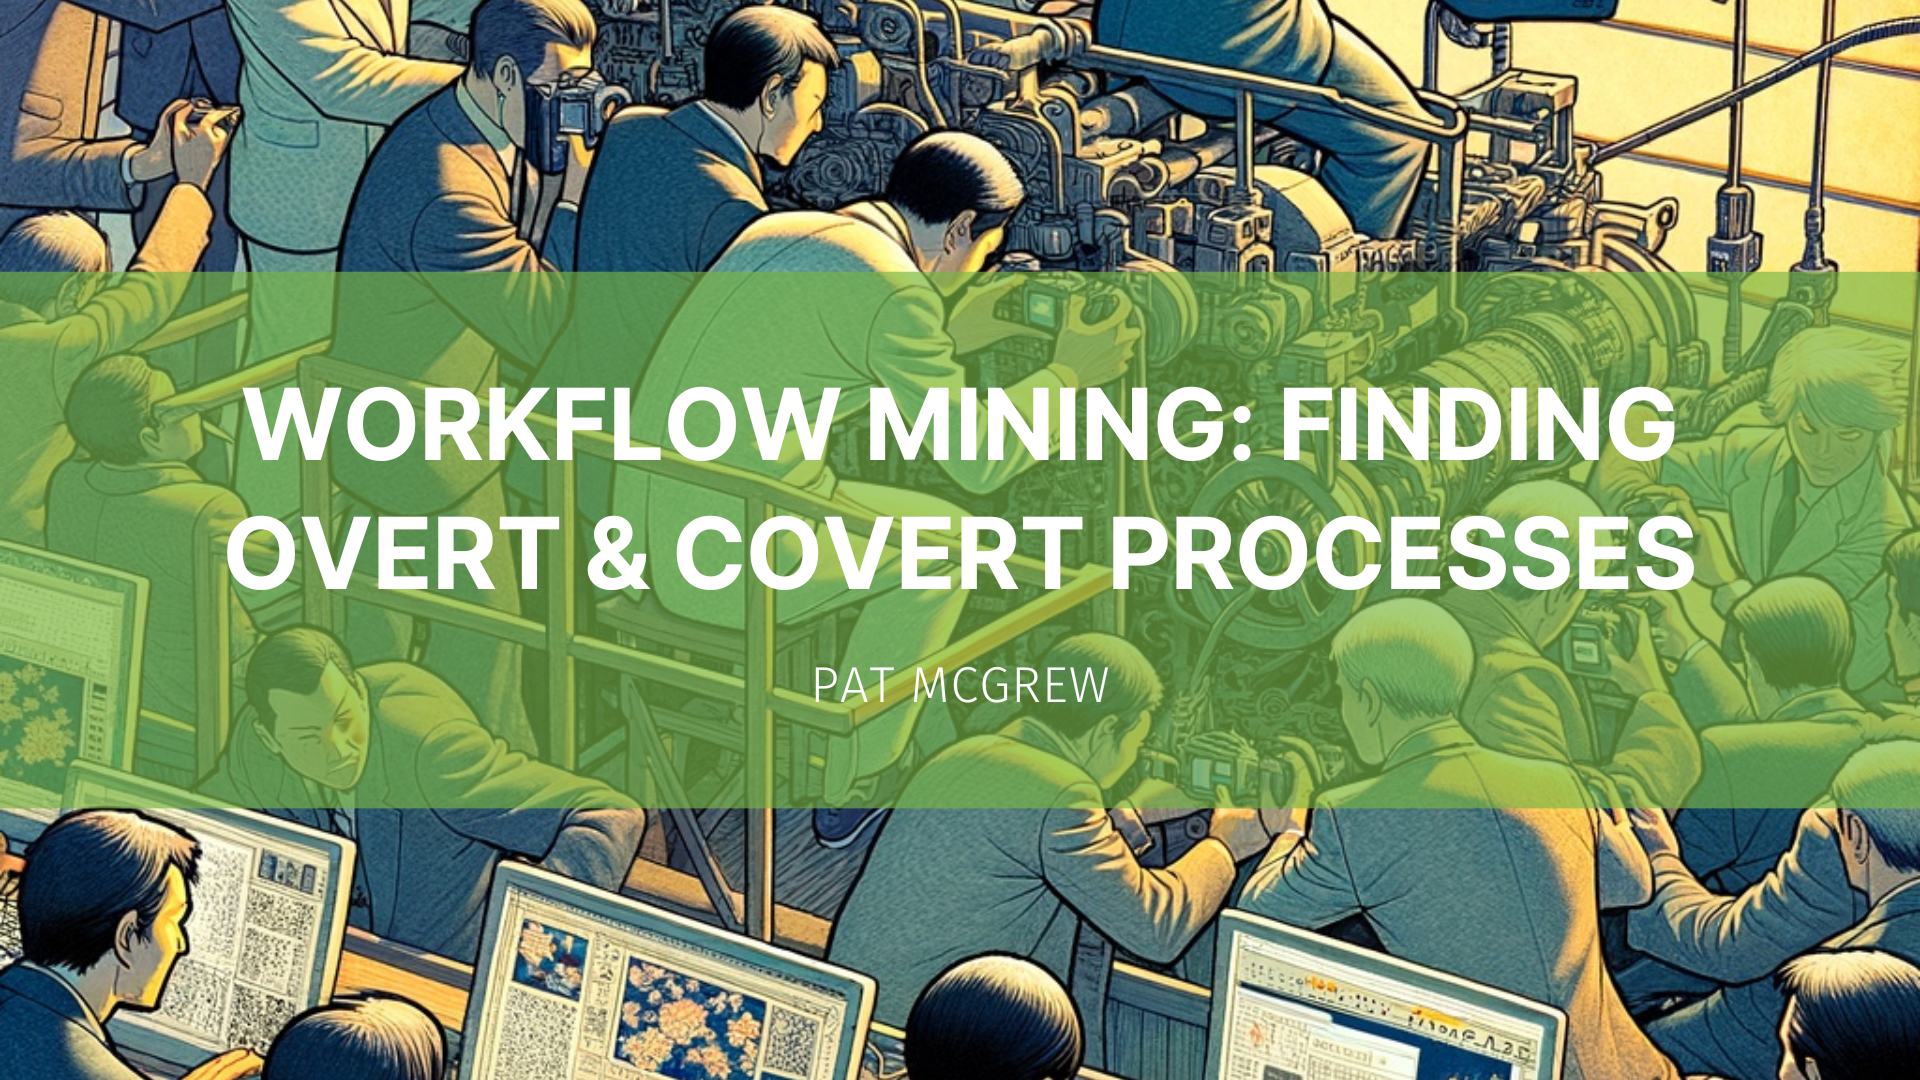 Featured image for “Workflow Mining: Finding Overt & Covert Processes”